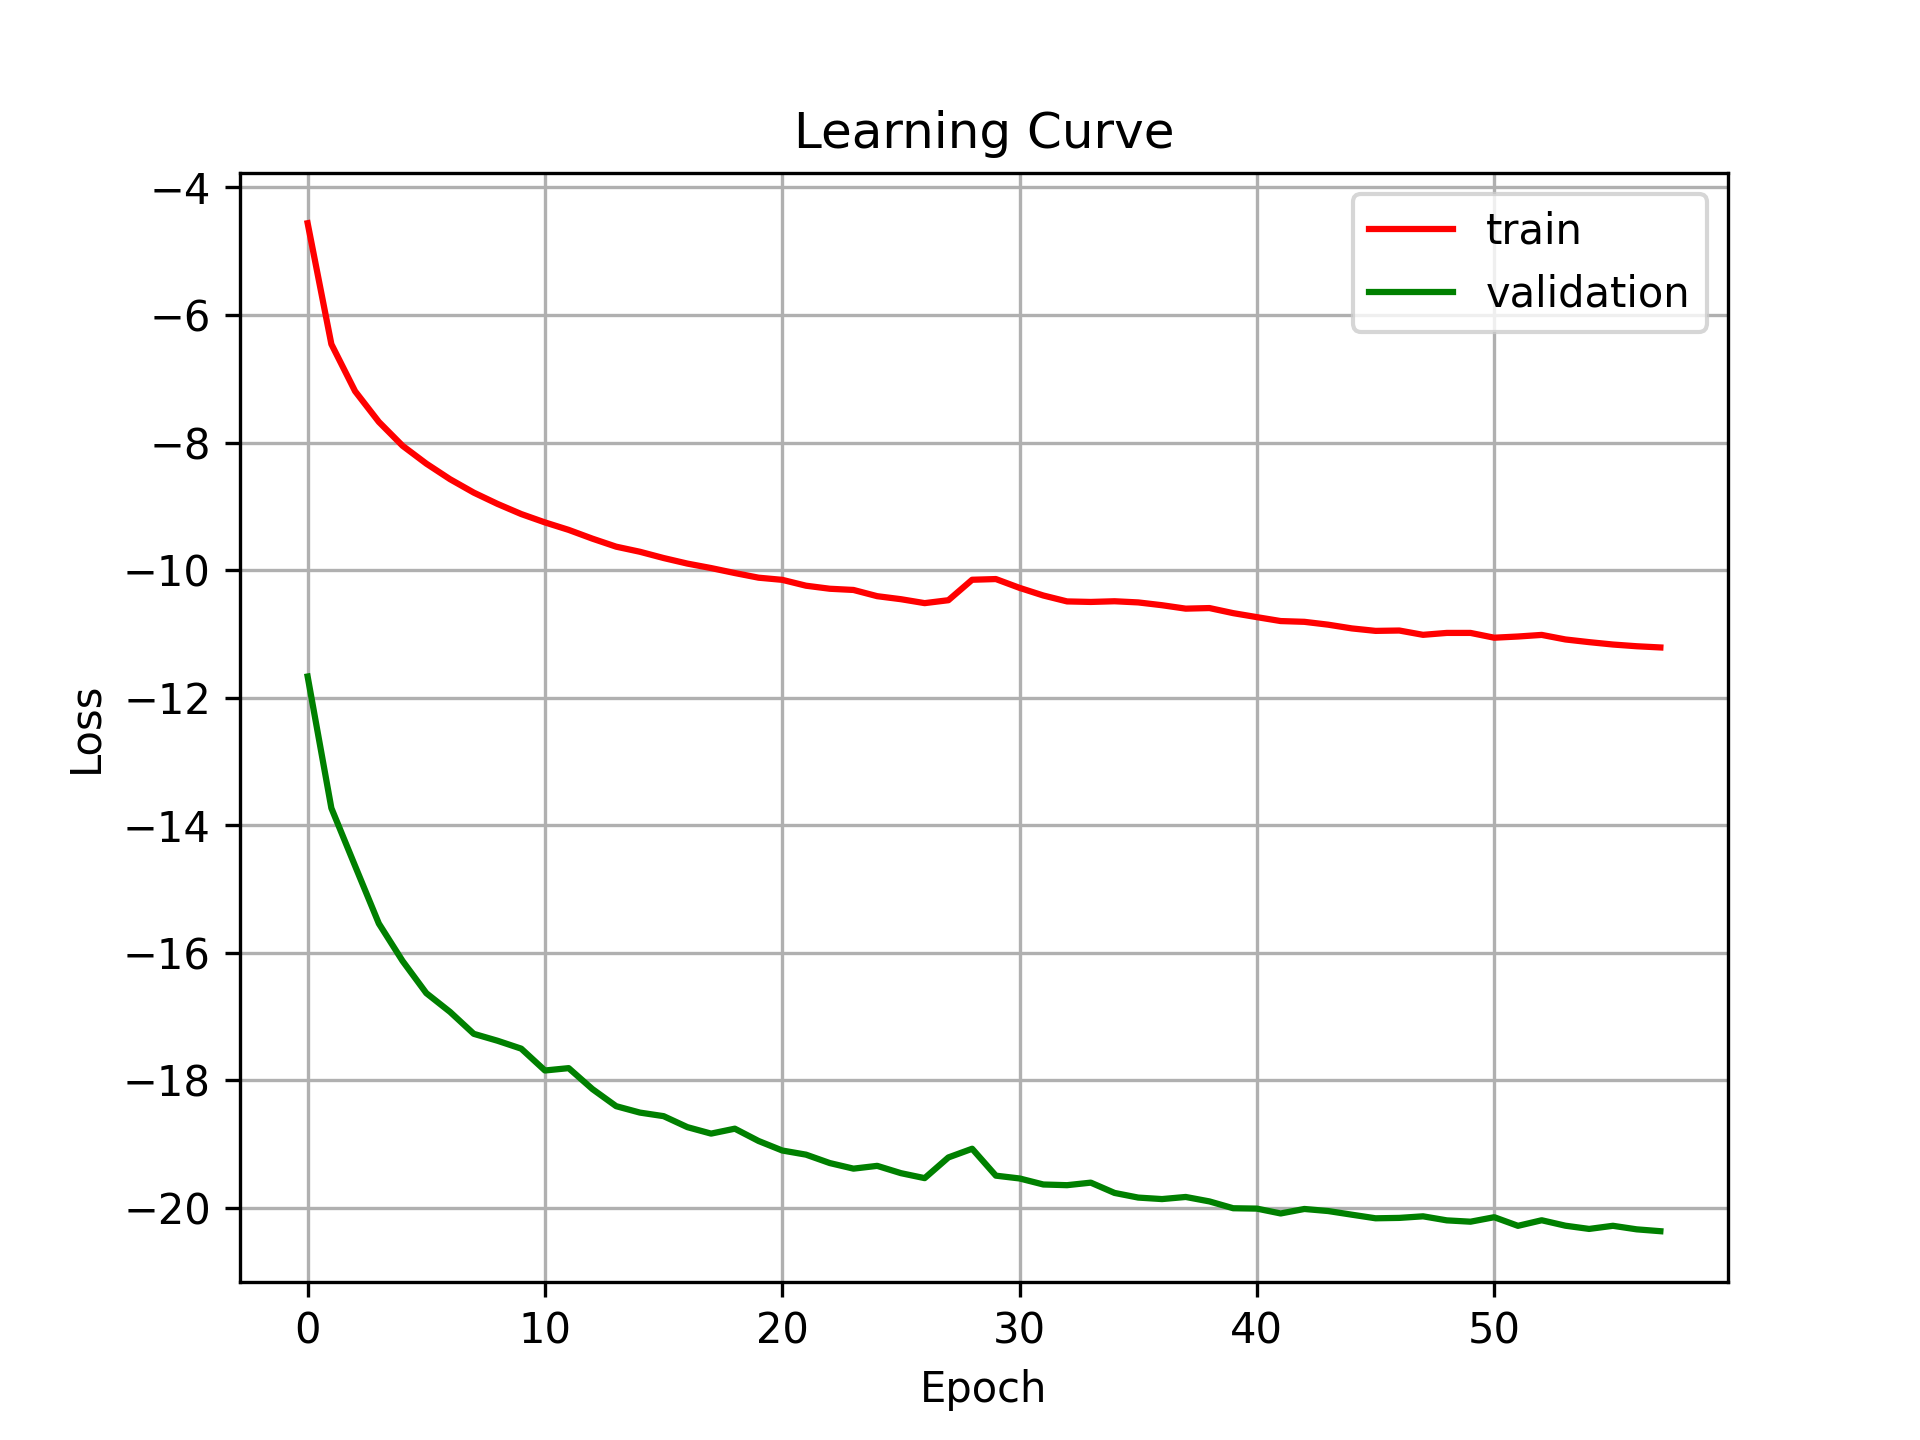 Training curves of our model.